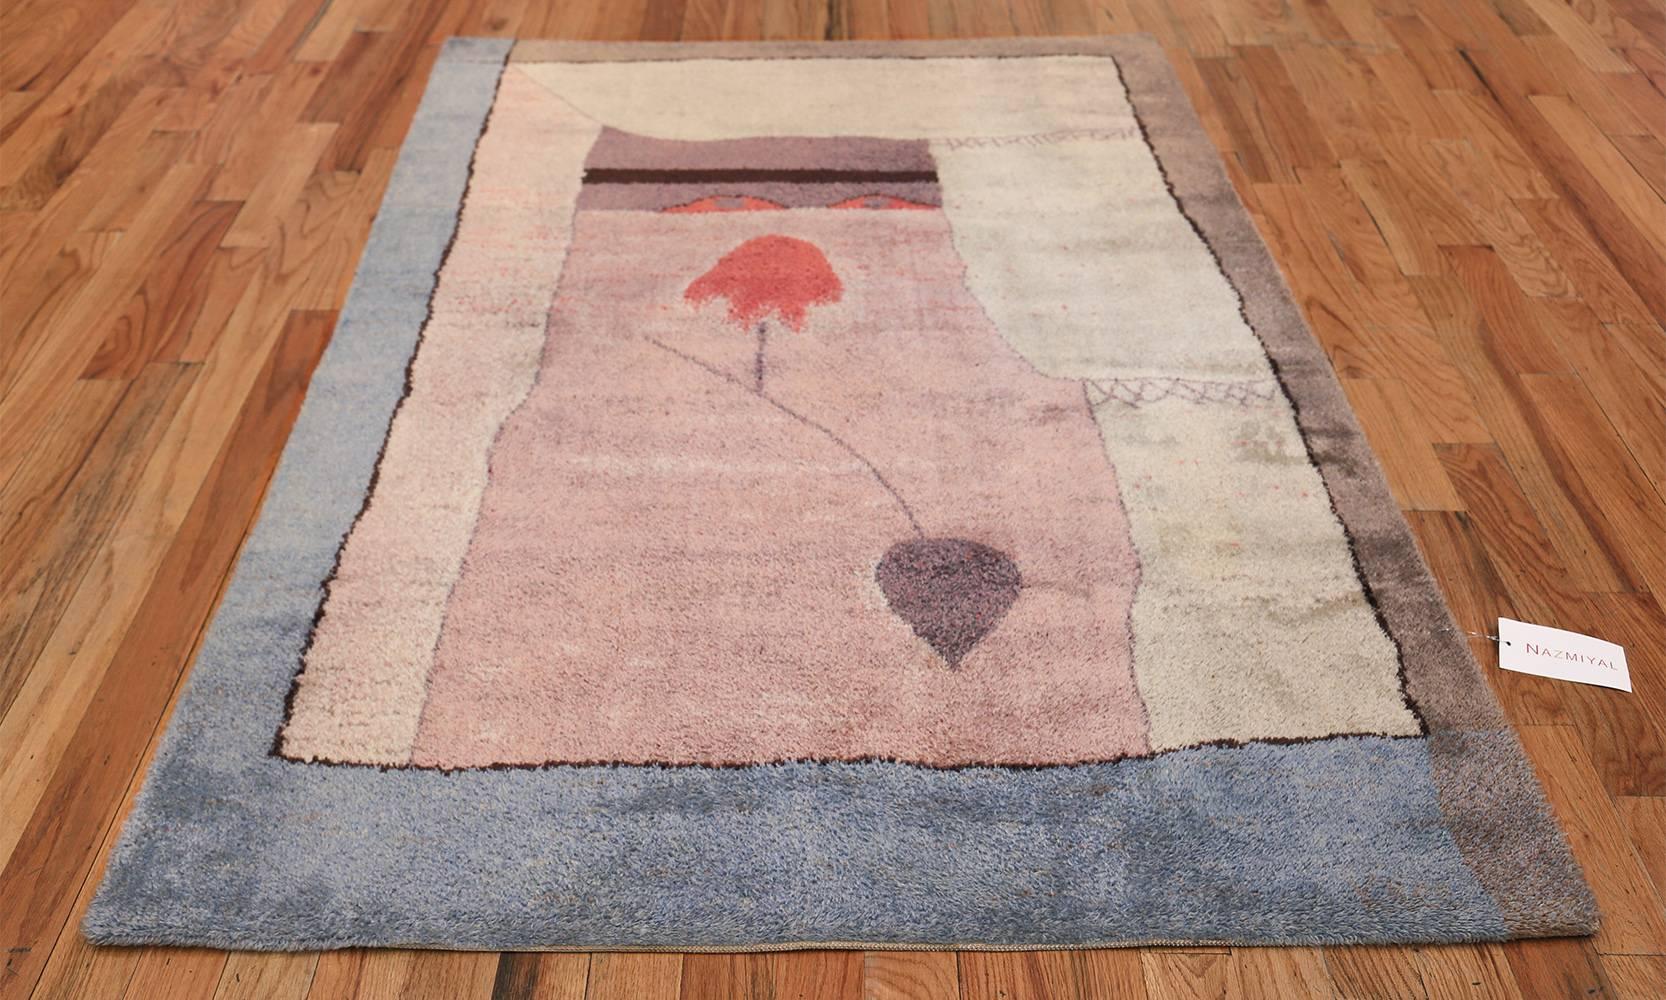 Breathtaking vintage After Paul Klee Arab song Scandinavian Ege Art Line rug, country of origin / rug type: Denmark, date circa 1994

 In 1938, Mads Eg Damgaard had a vision for what is today the number one flooring company in Europe, for those with